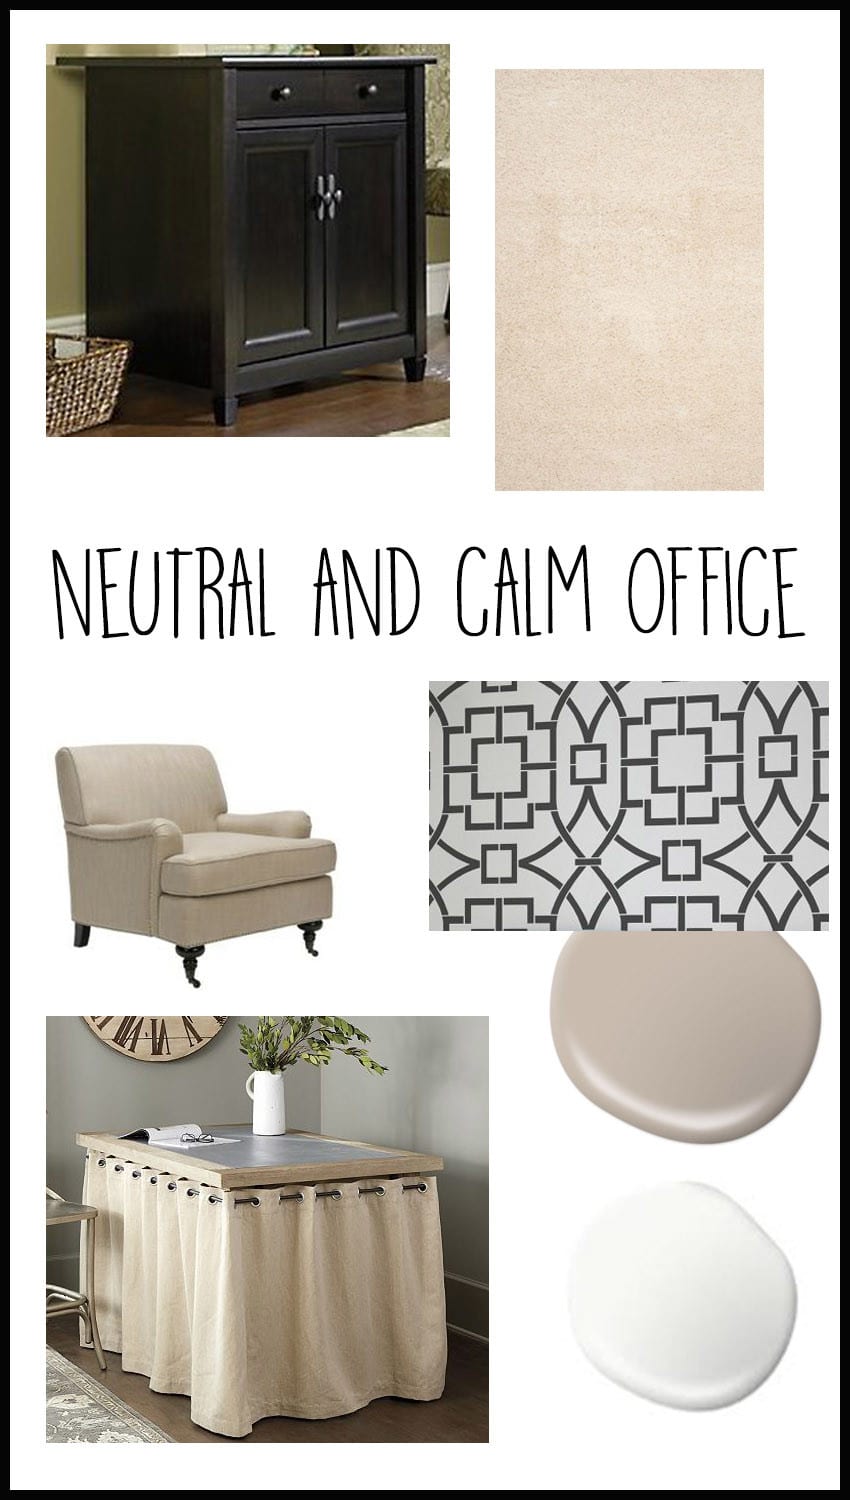 I'm joining the One Room Challenge for the second time, this time transforming my bold and colorful office to a neutral and calm office / craft room.